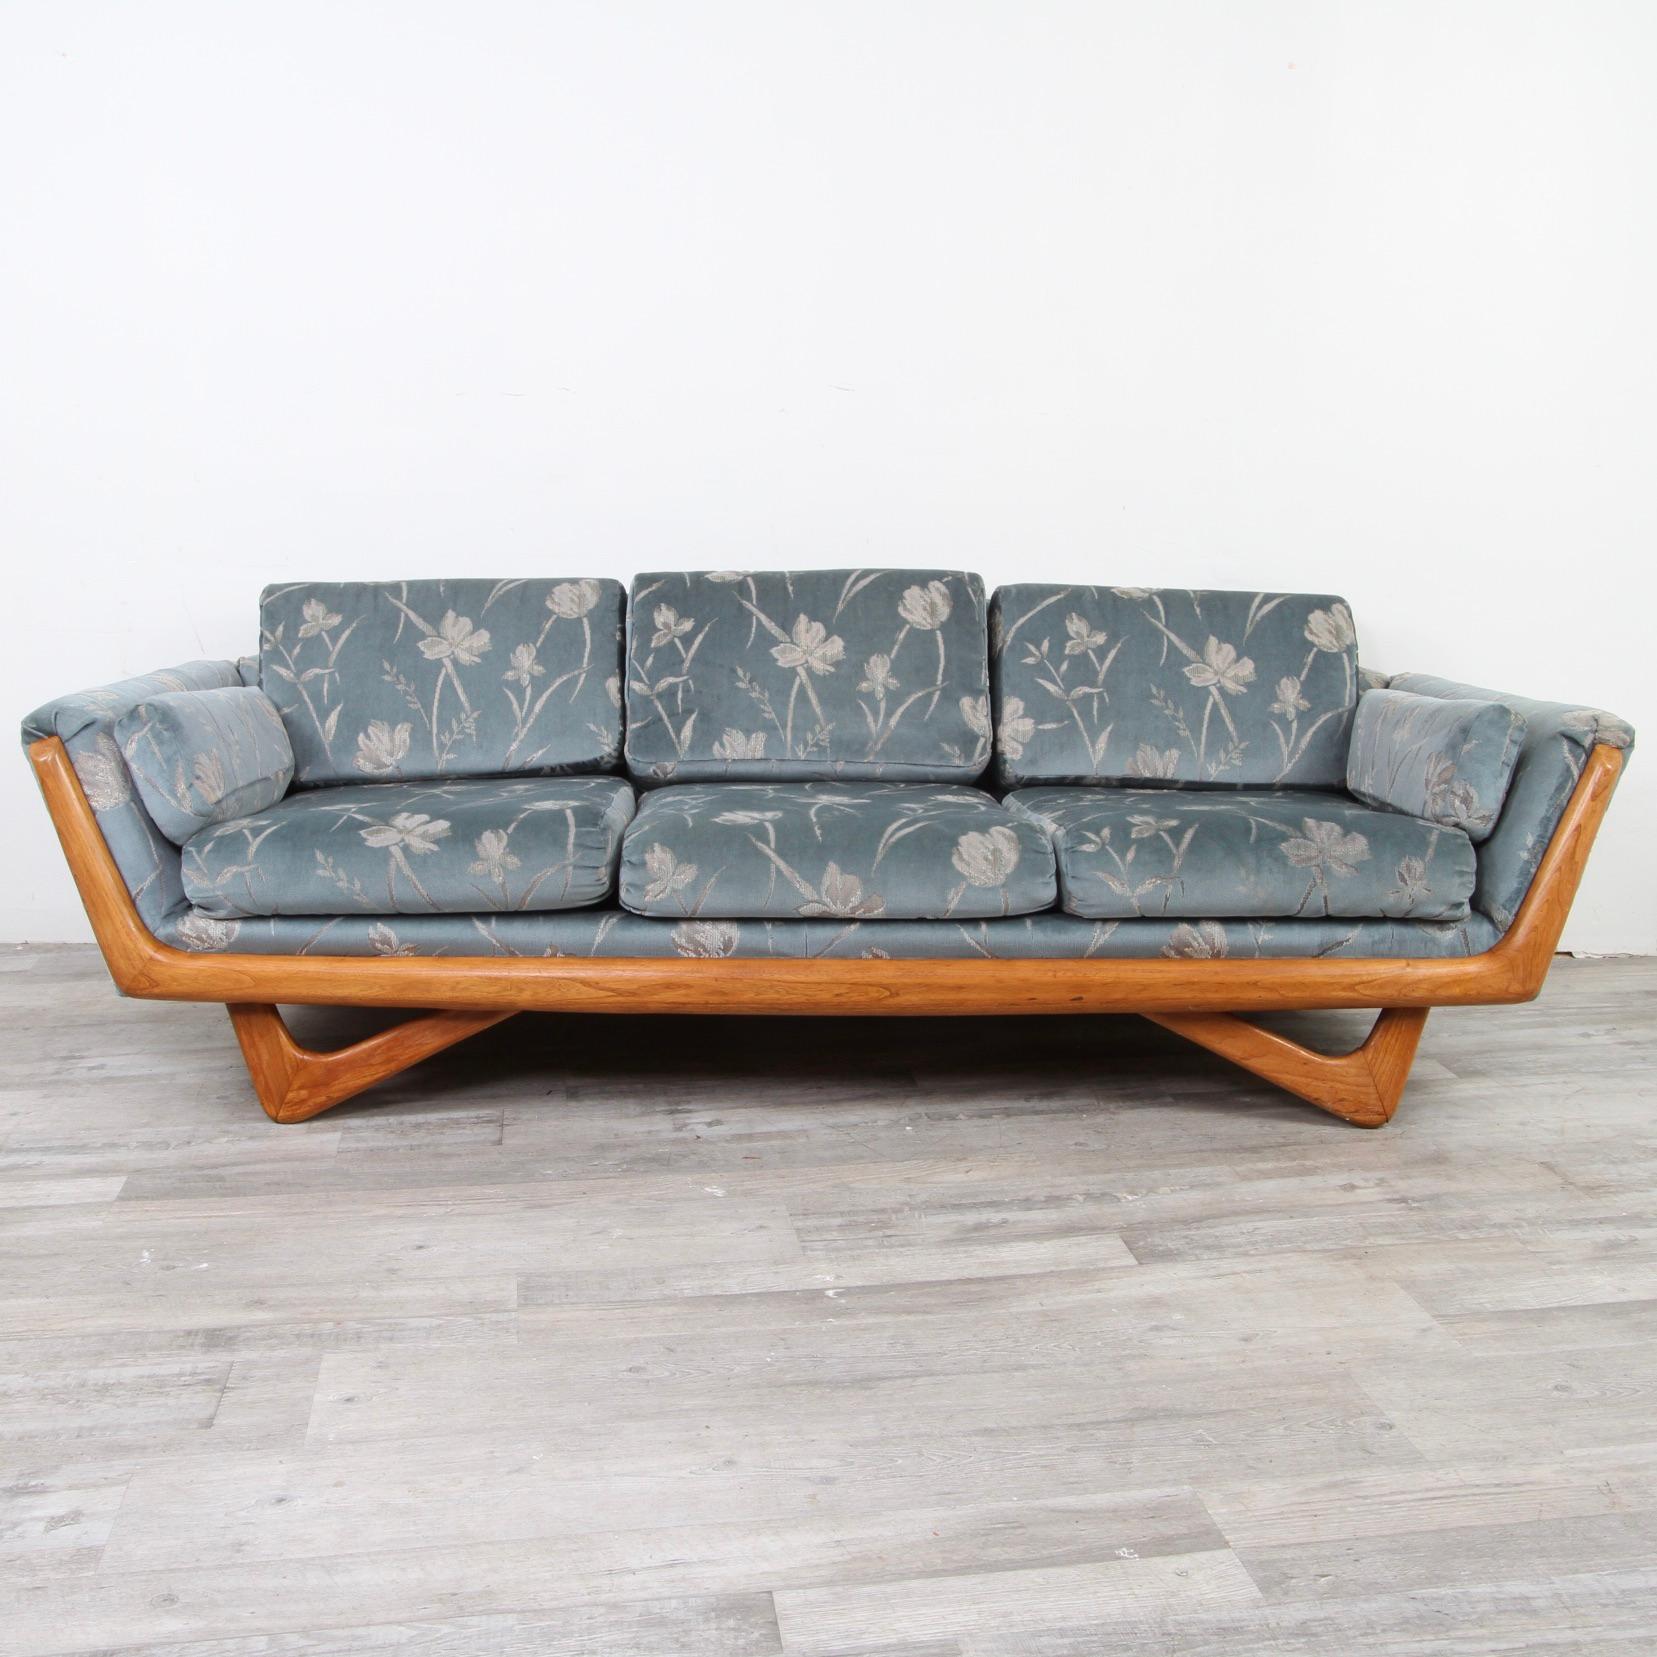 Perhaps the closest version of Adrian Pearsall's designs for Craft Associate is this by Bassett Furniture's Prestige division. Very well made with most likely a still very clean late 70's reupholstery, this long gondola-shaped sofa is trimmed in the